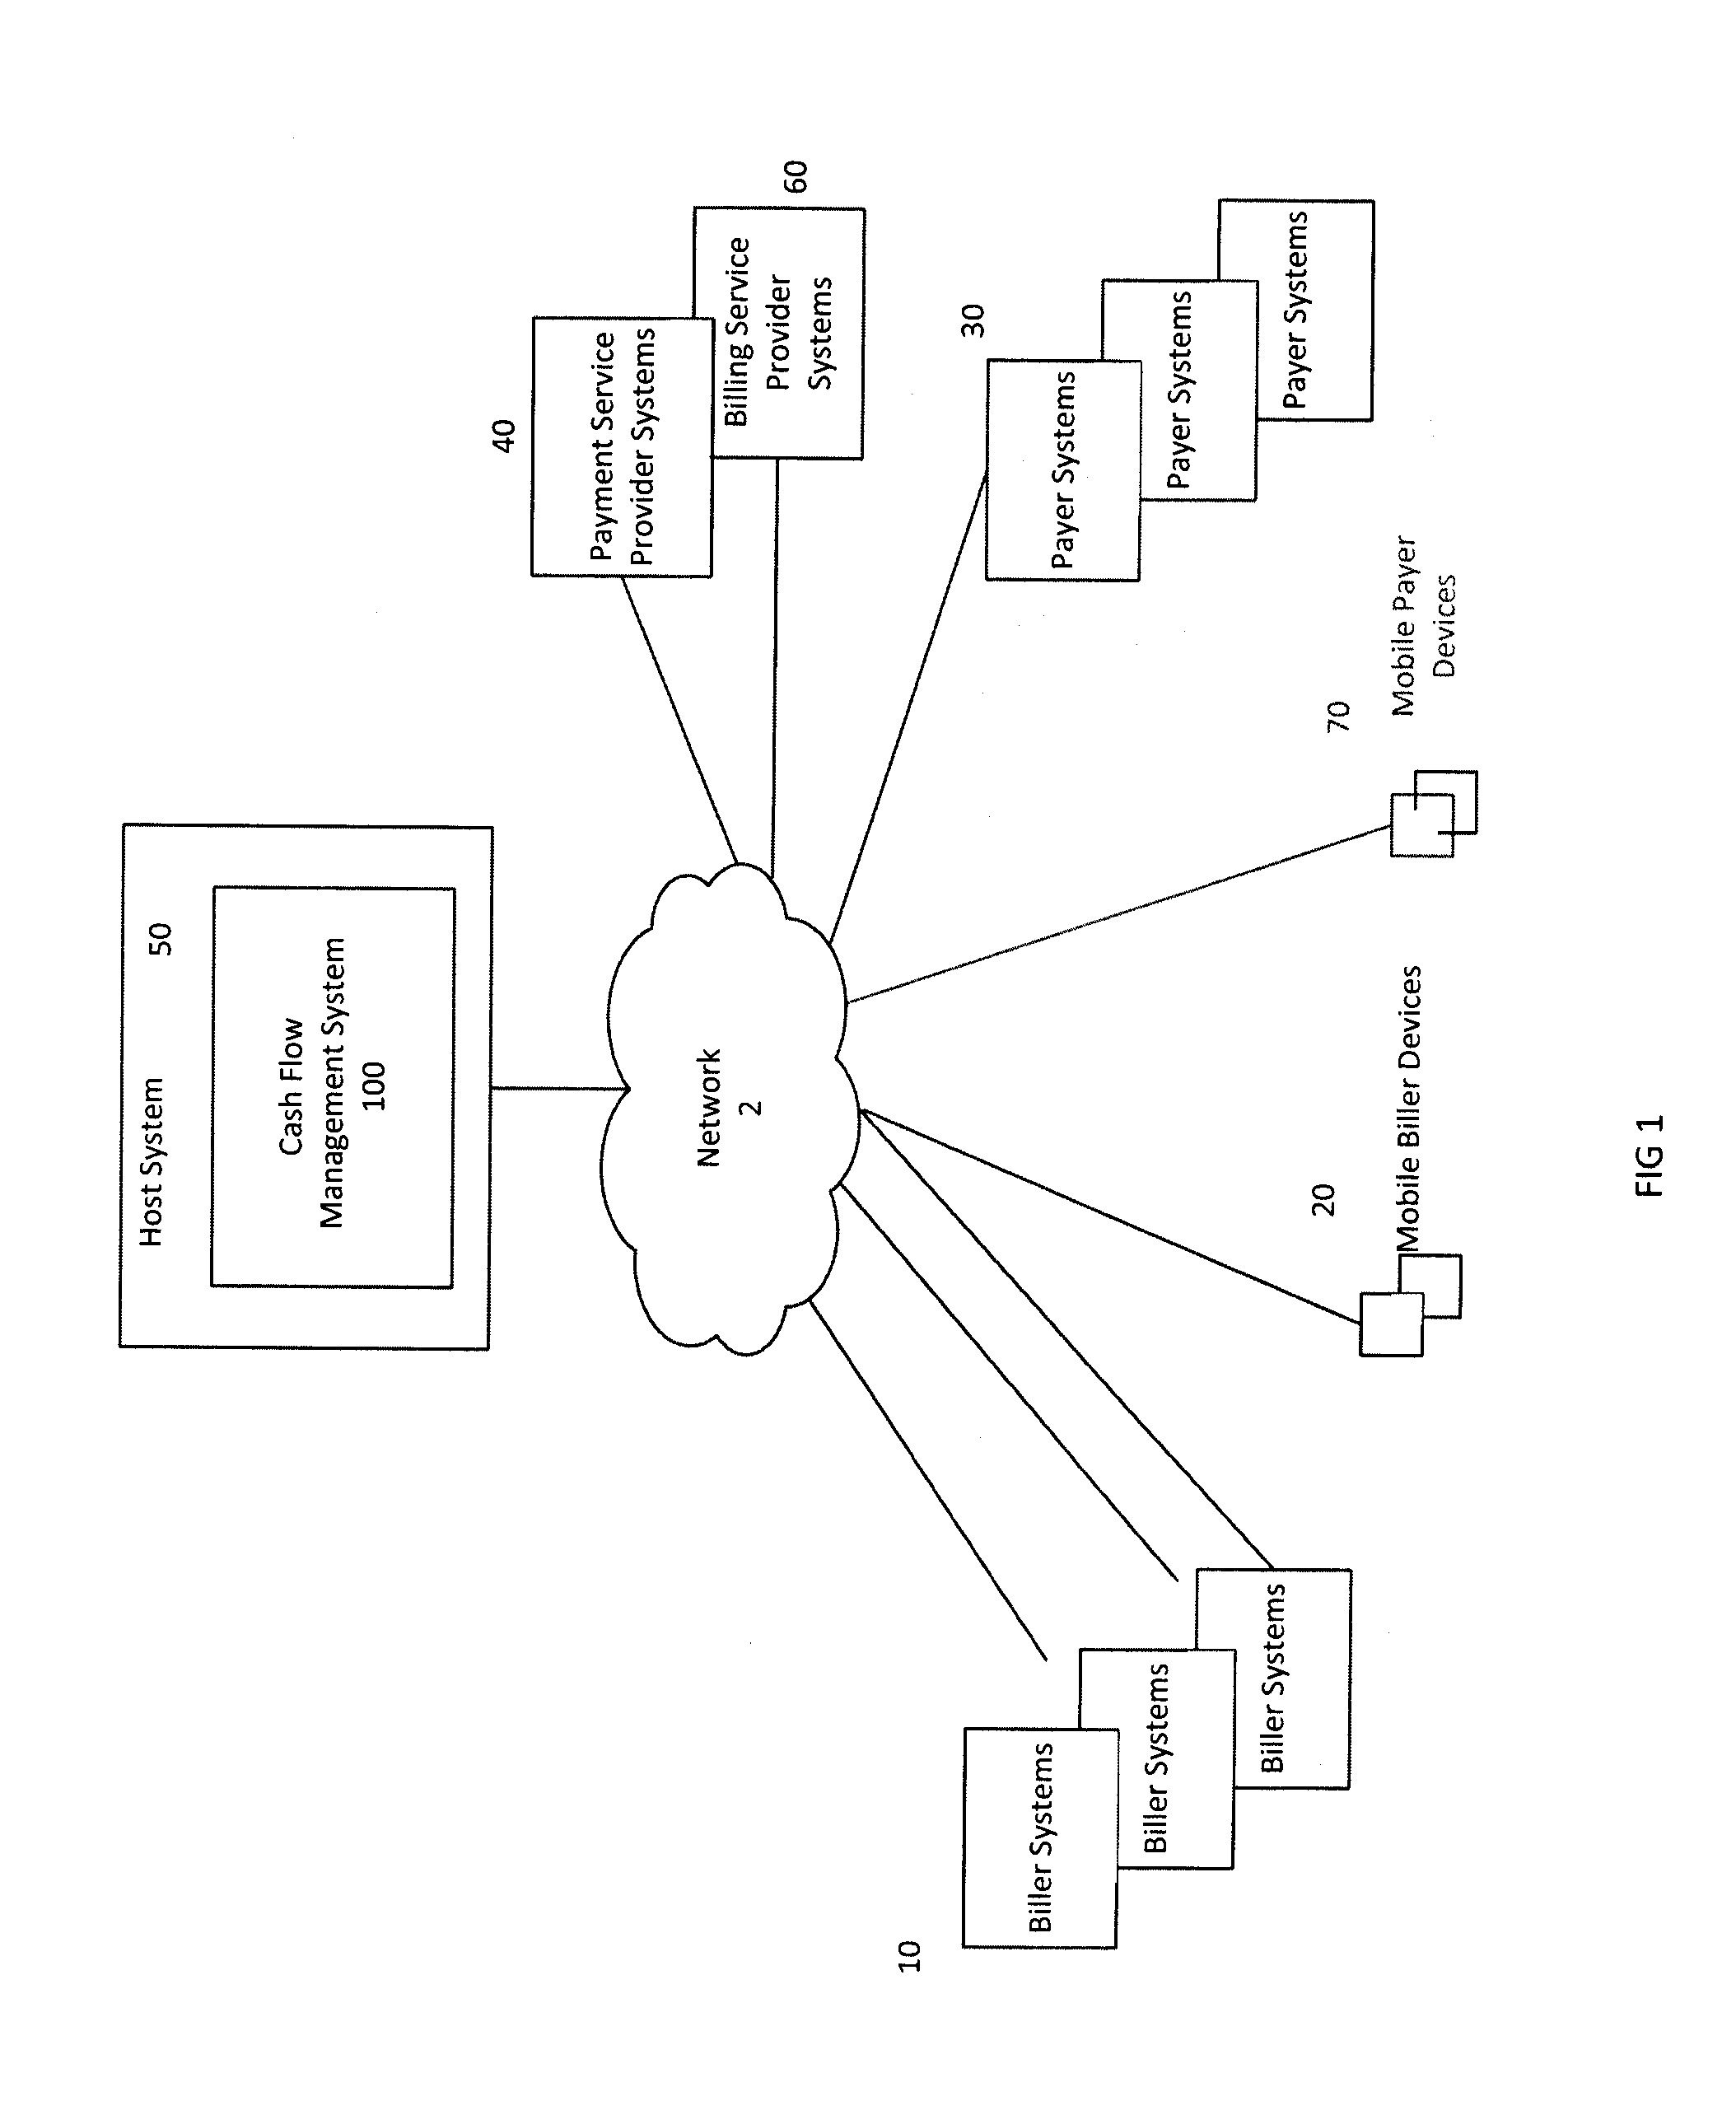 Integrated Electronic Cash Flow Management System and Method